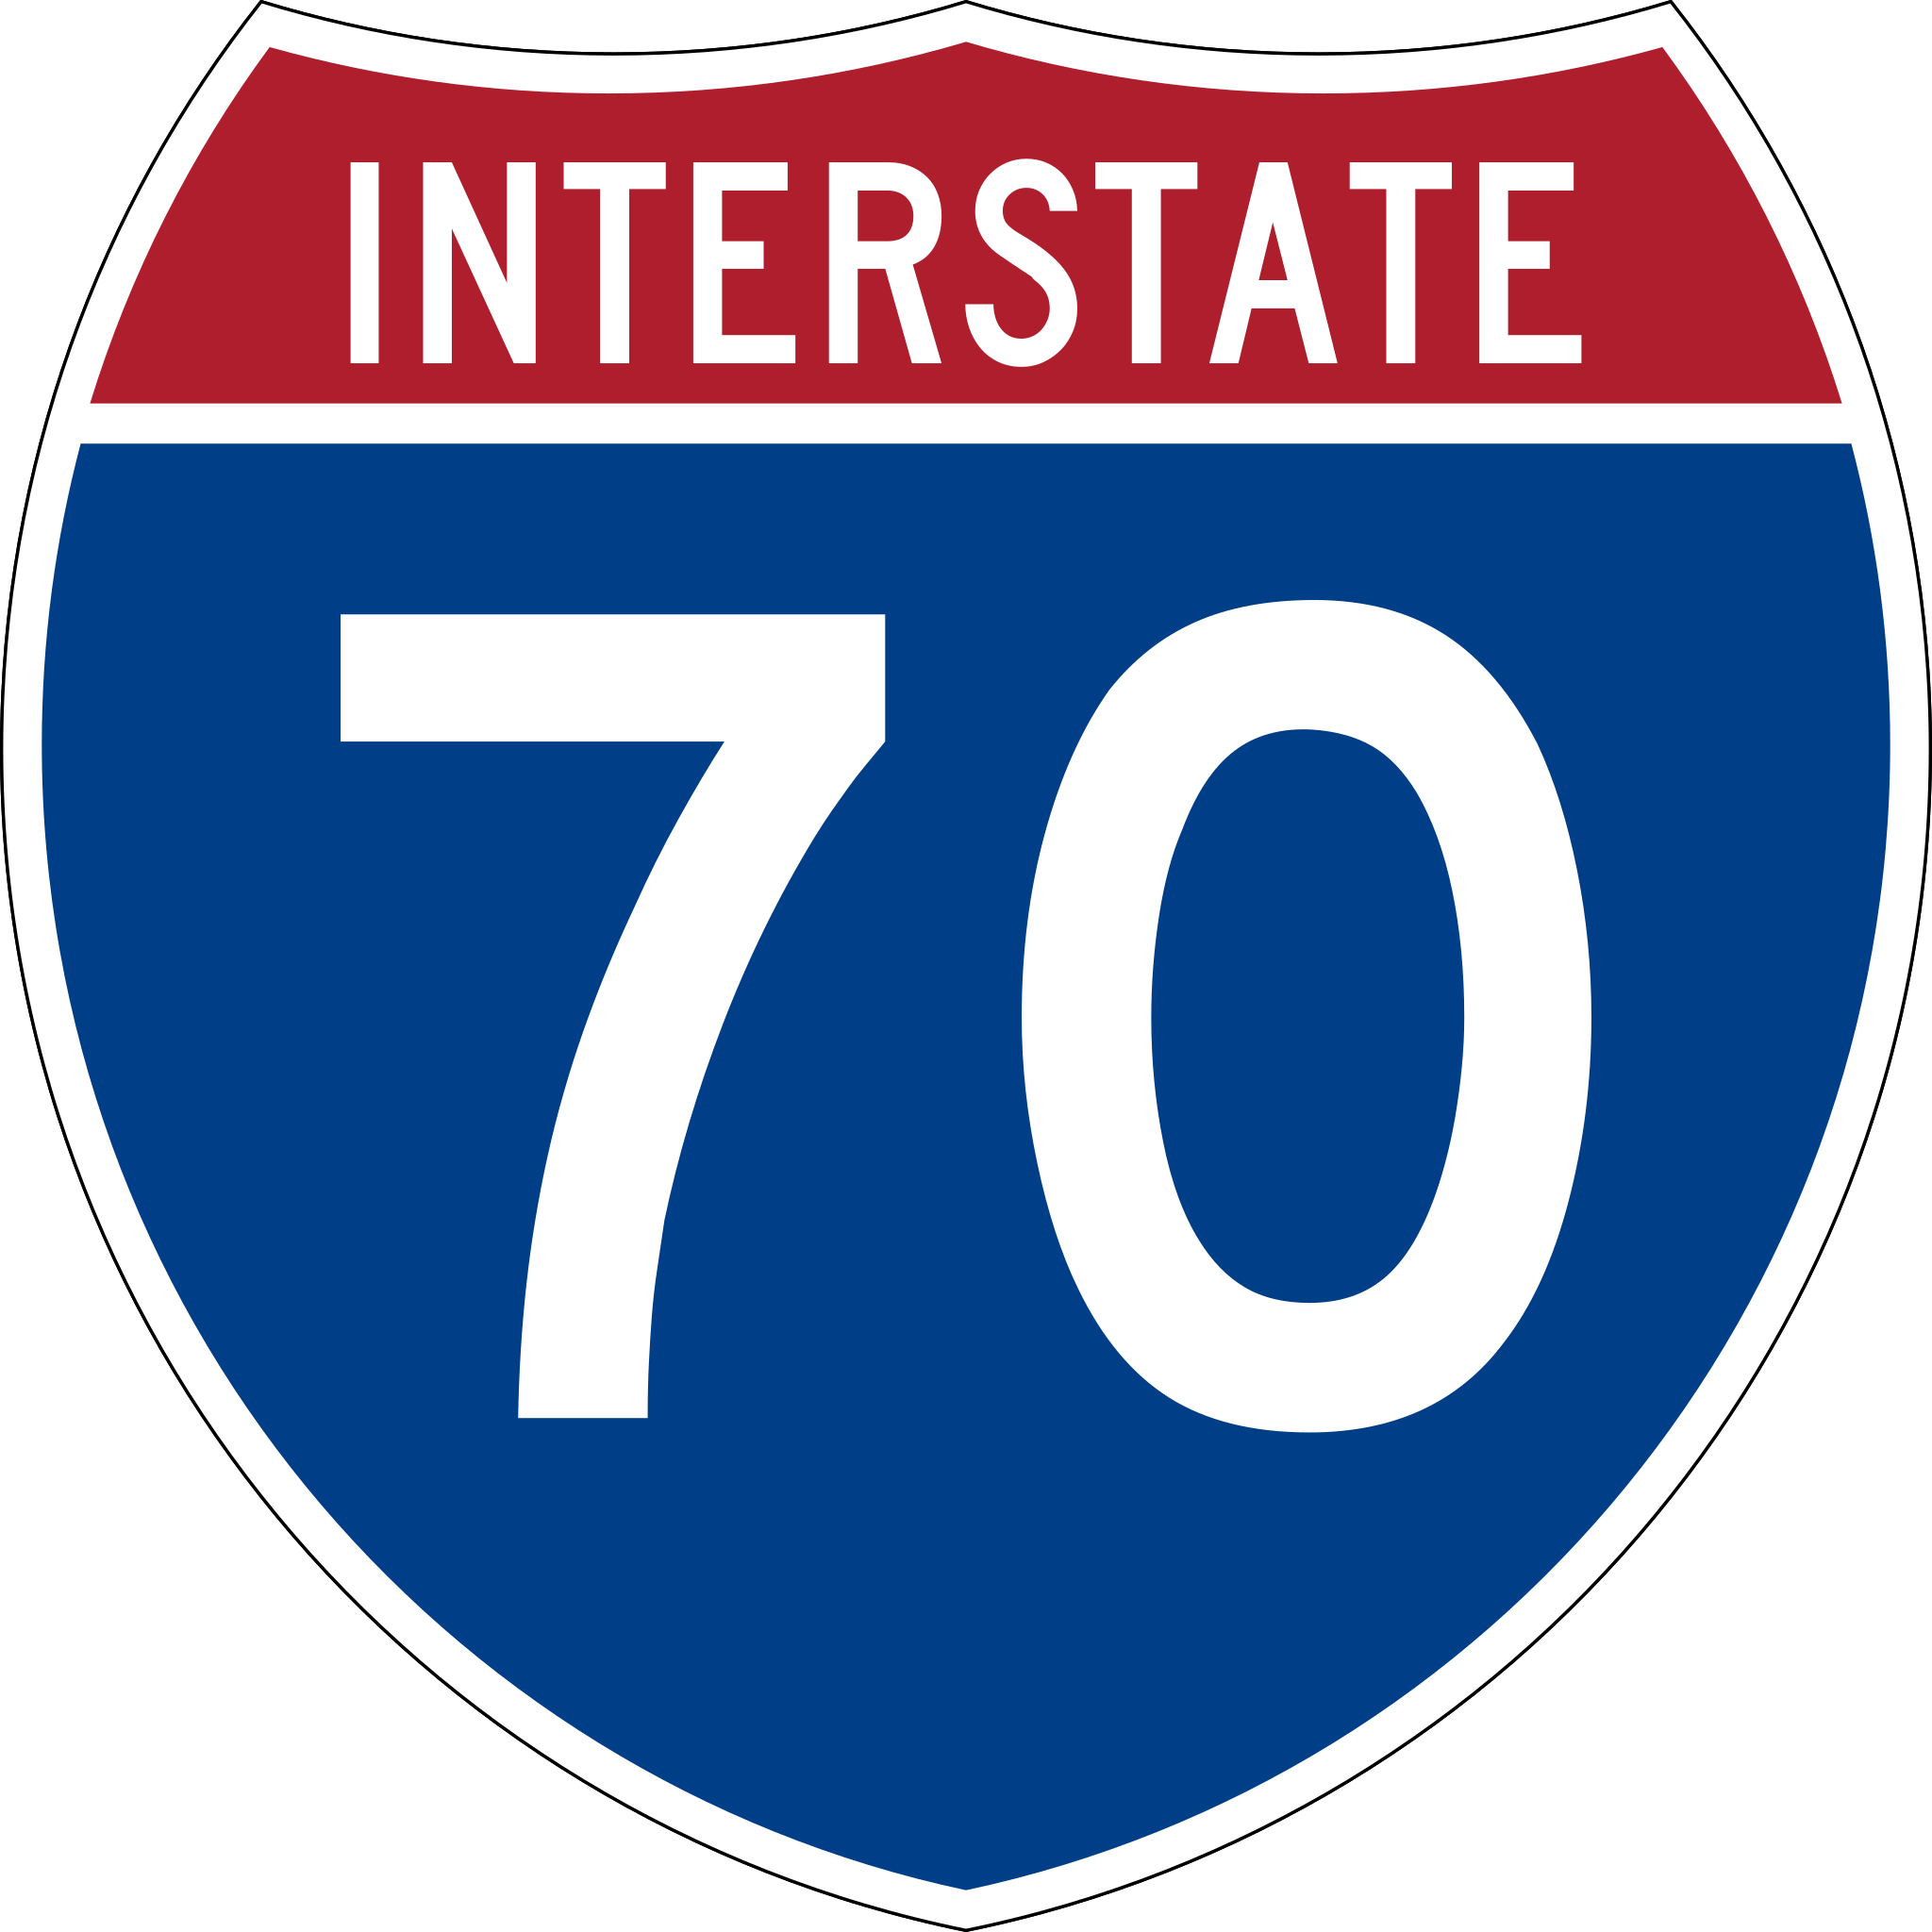 Road Work To Affect Traffic On I-70 Near Myersville